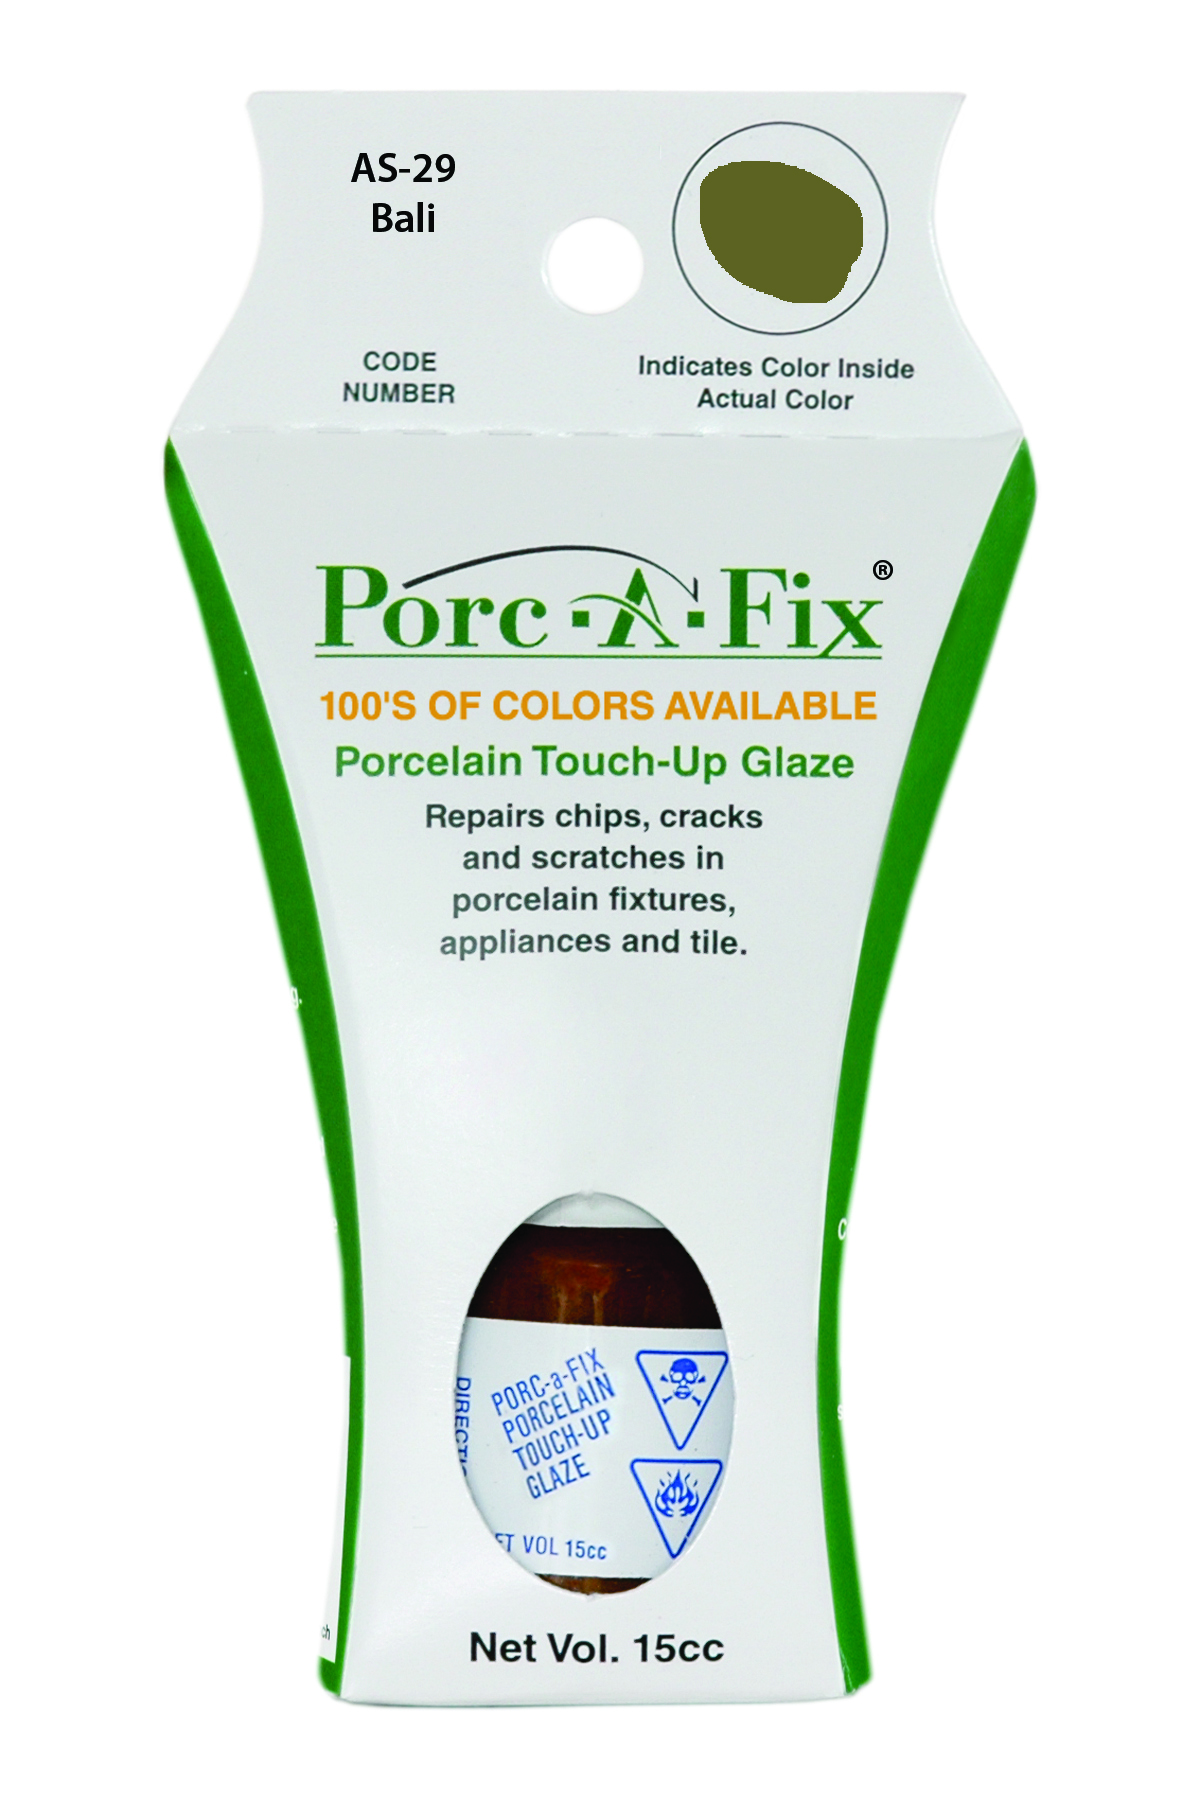 Fixture-Fix | AS-29 | Porc-A-Fix Touch-Up Glaze American Standard Bali - Compatible with American Standard 070900-1440A Touch Up Paint Kit - BALI